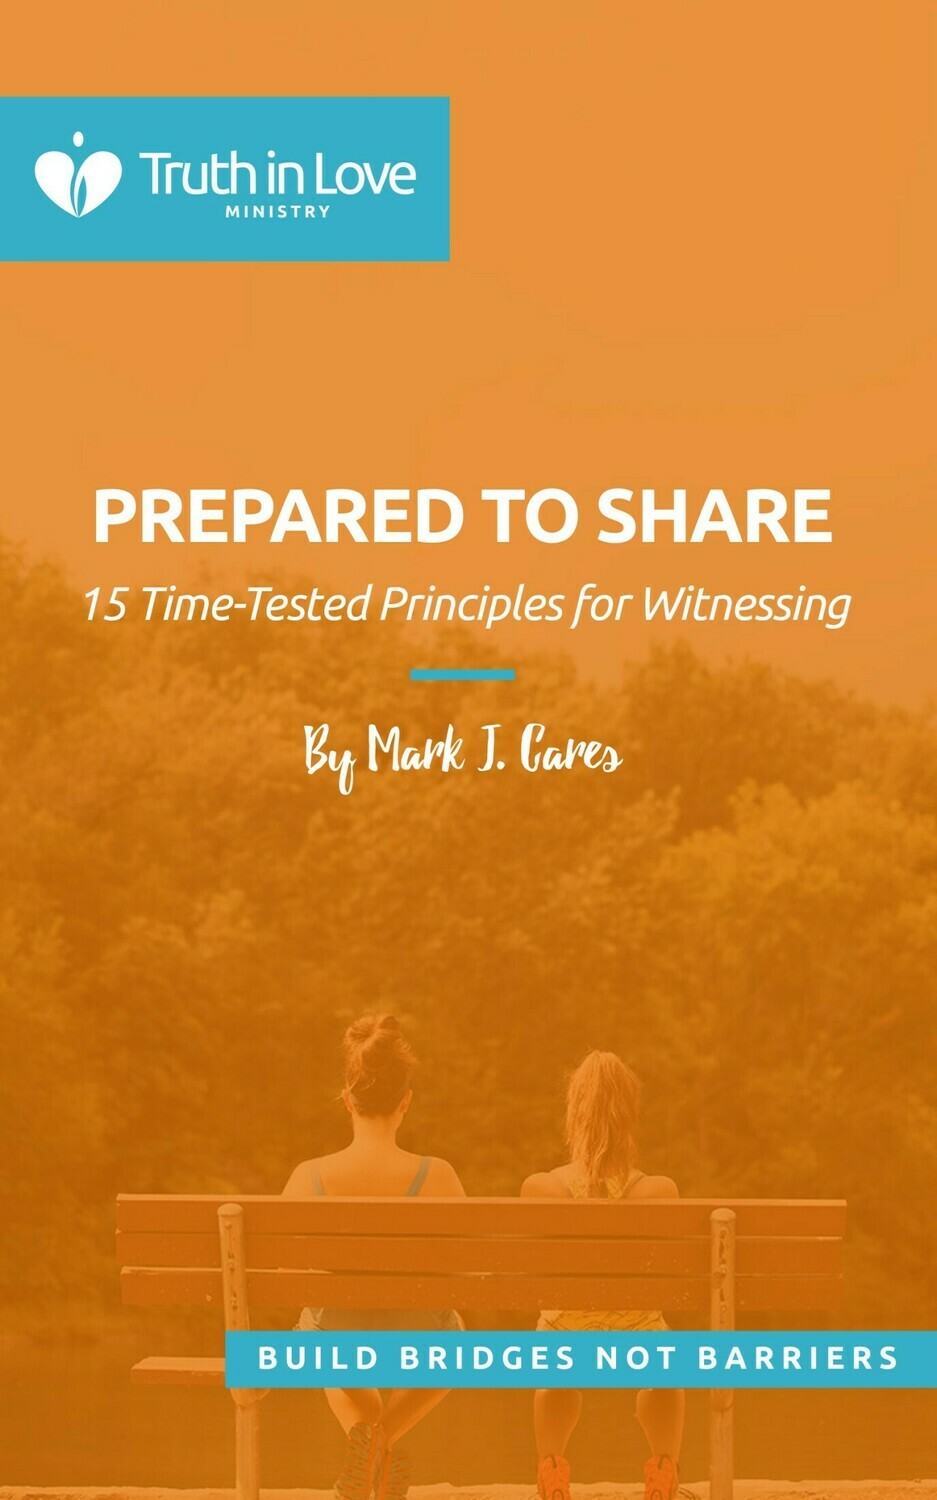 Digital Version:  Prepared to Share (EPUB format for an e-reader)